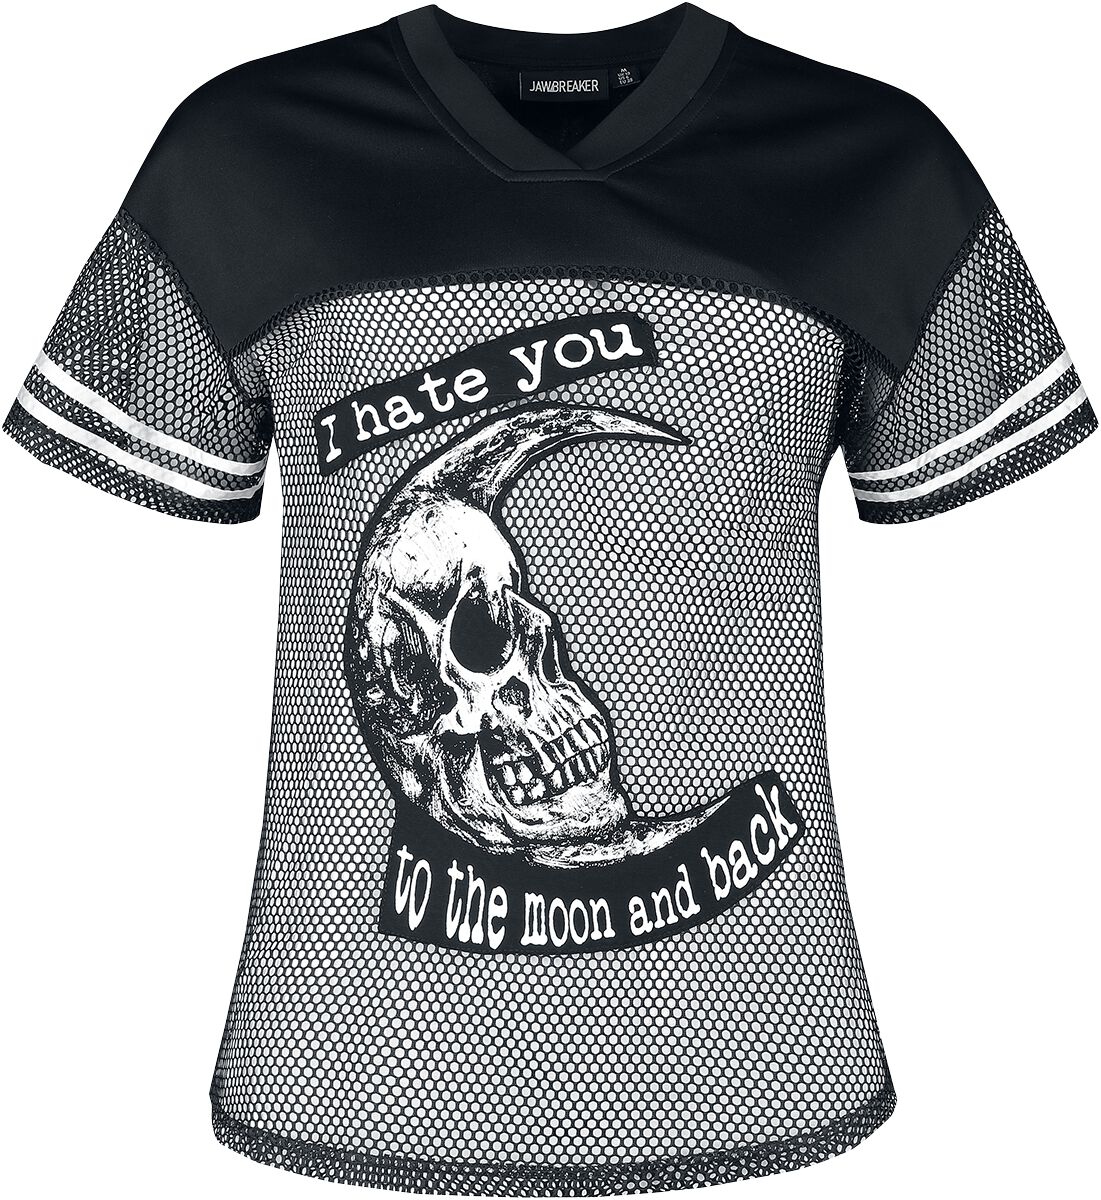 Image of T-Shirt Gothic di Jawbreaker - To the moon and back t-shirt - XS a S - Donna - nero/bianco